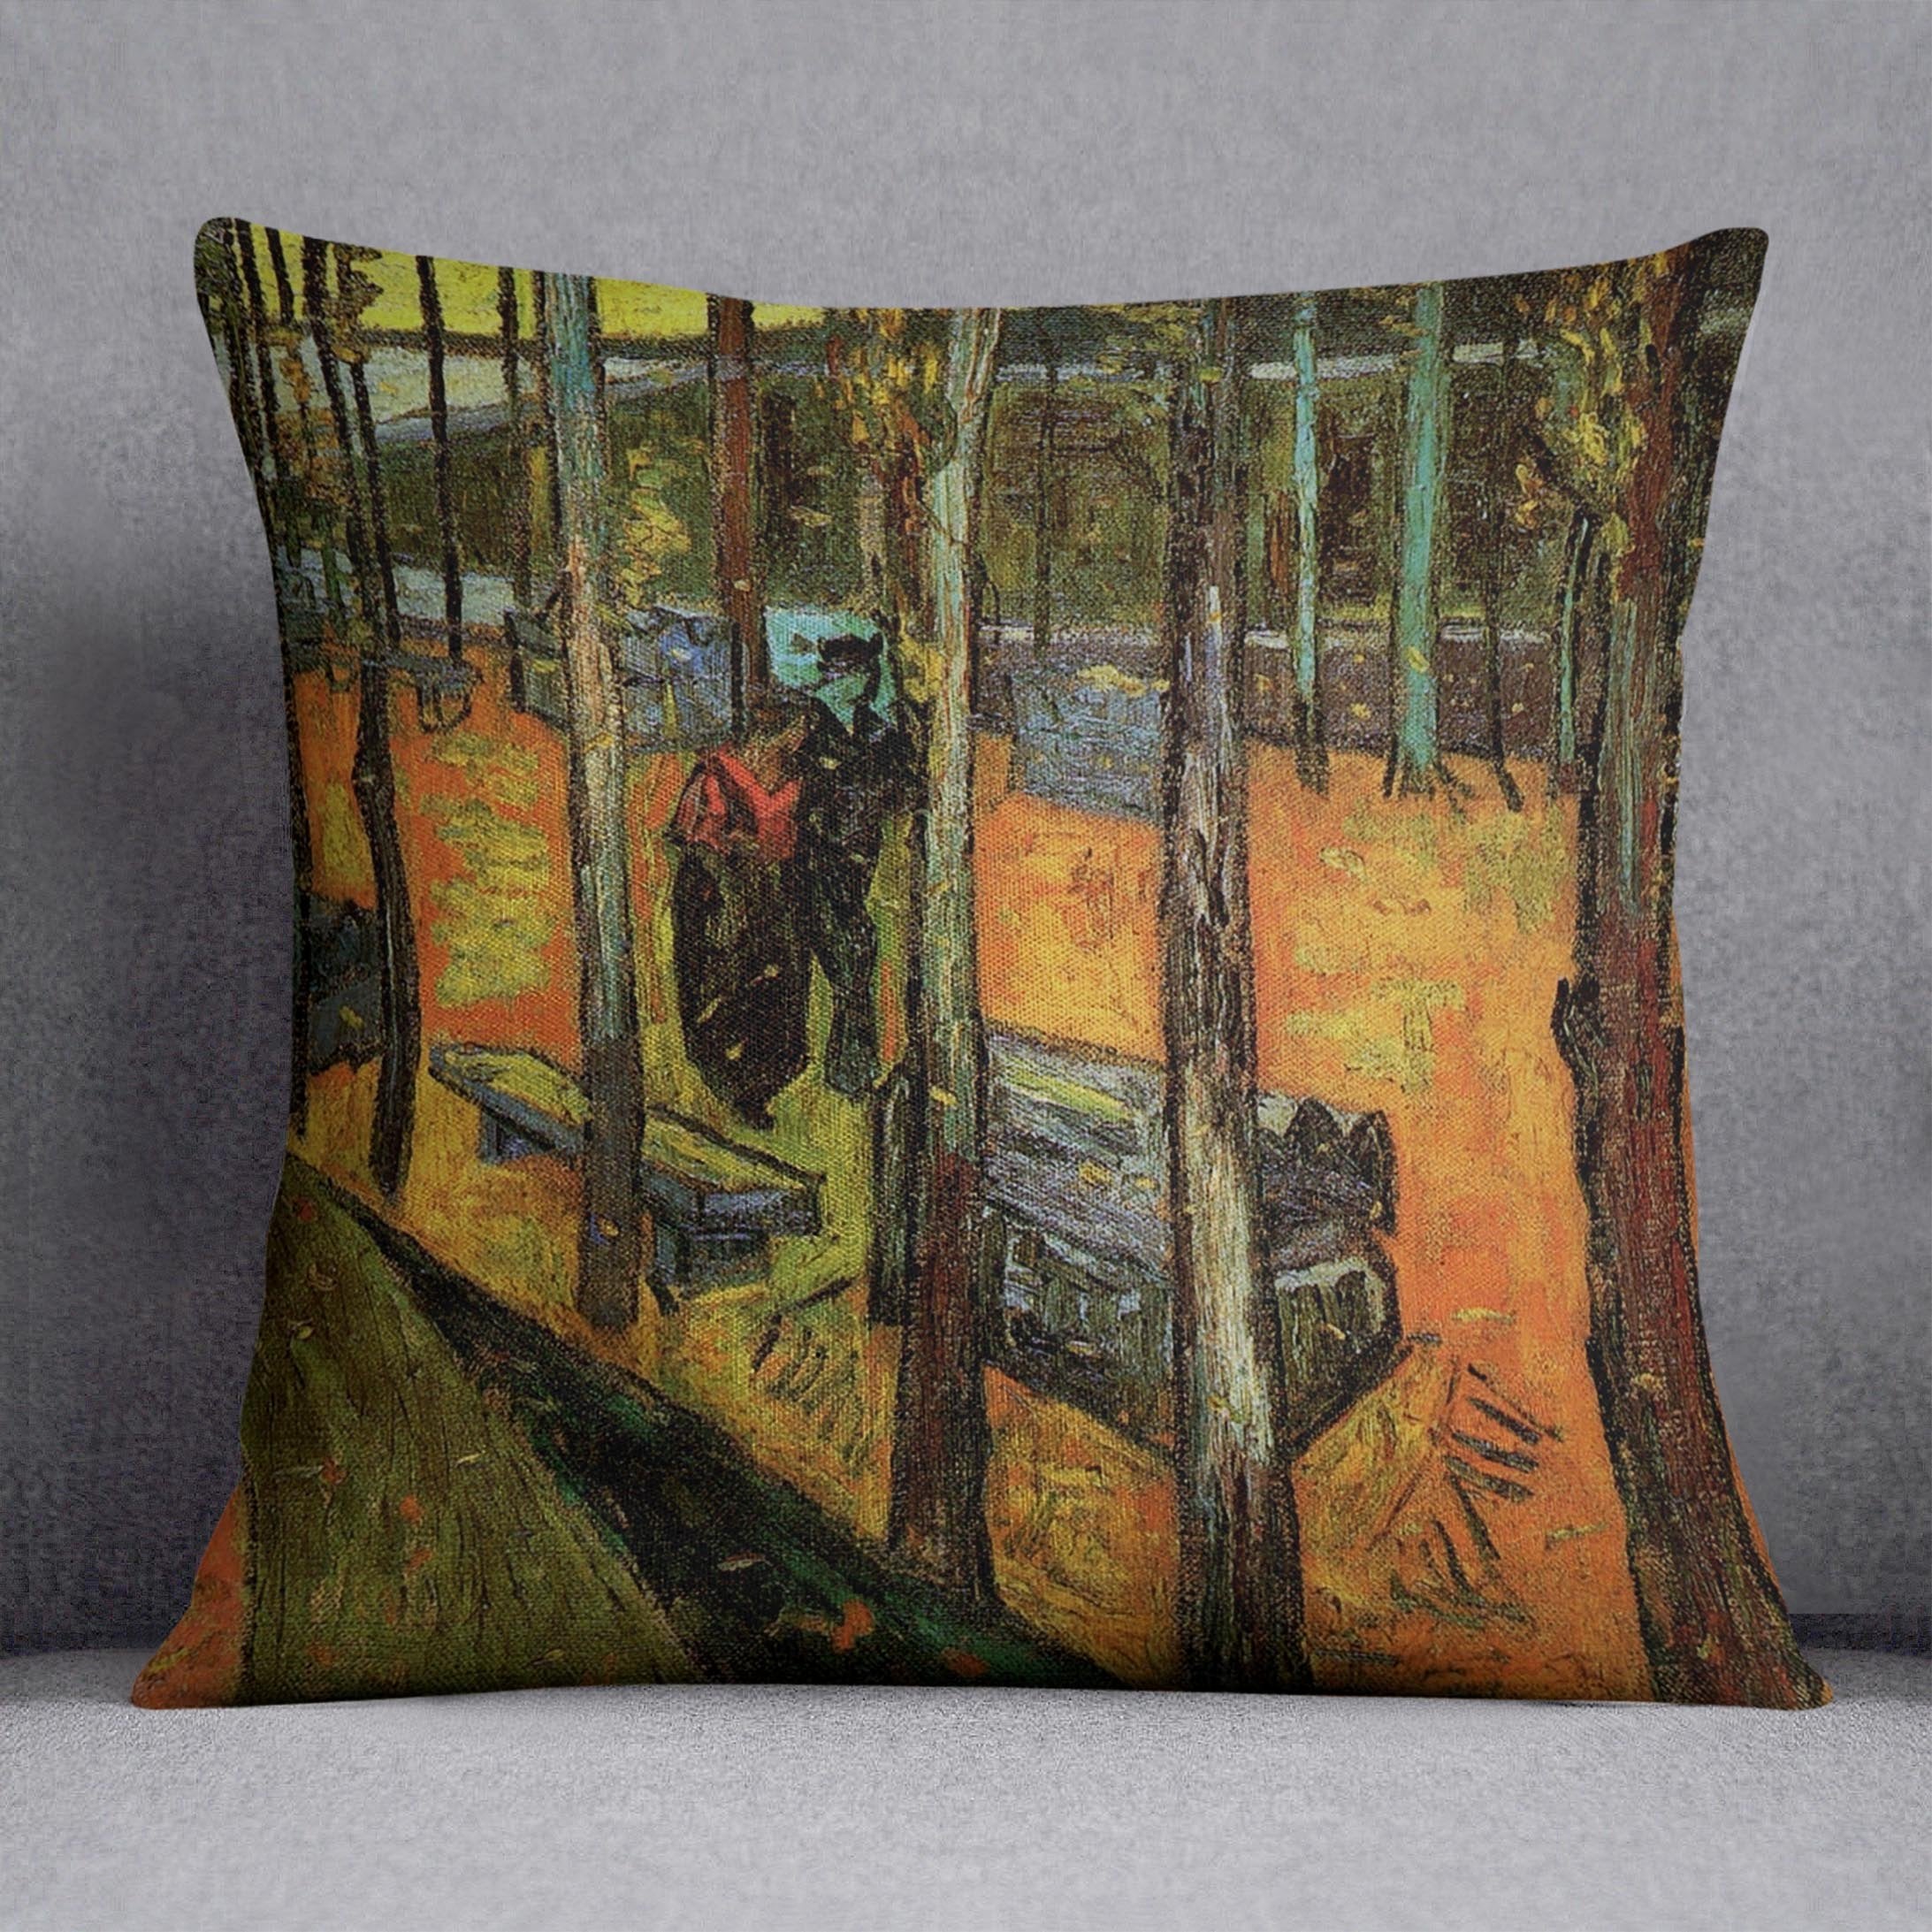 Les Alyscamps 2 by Van Gogh Throw Pillow